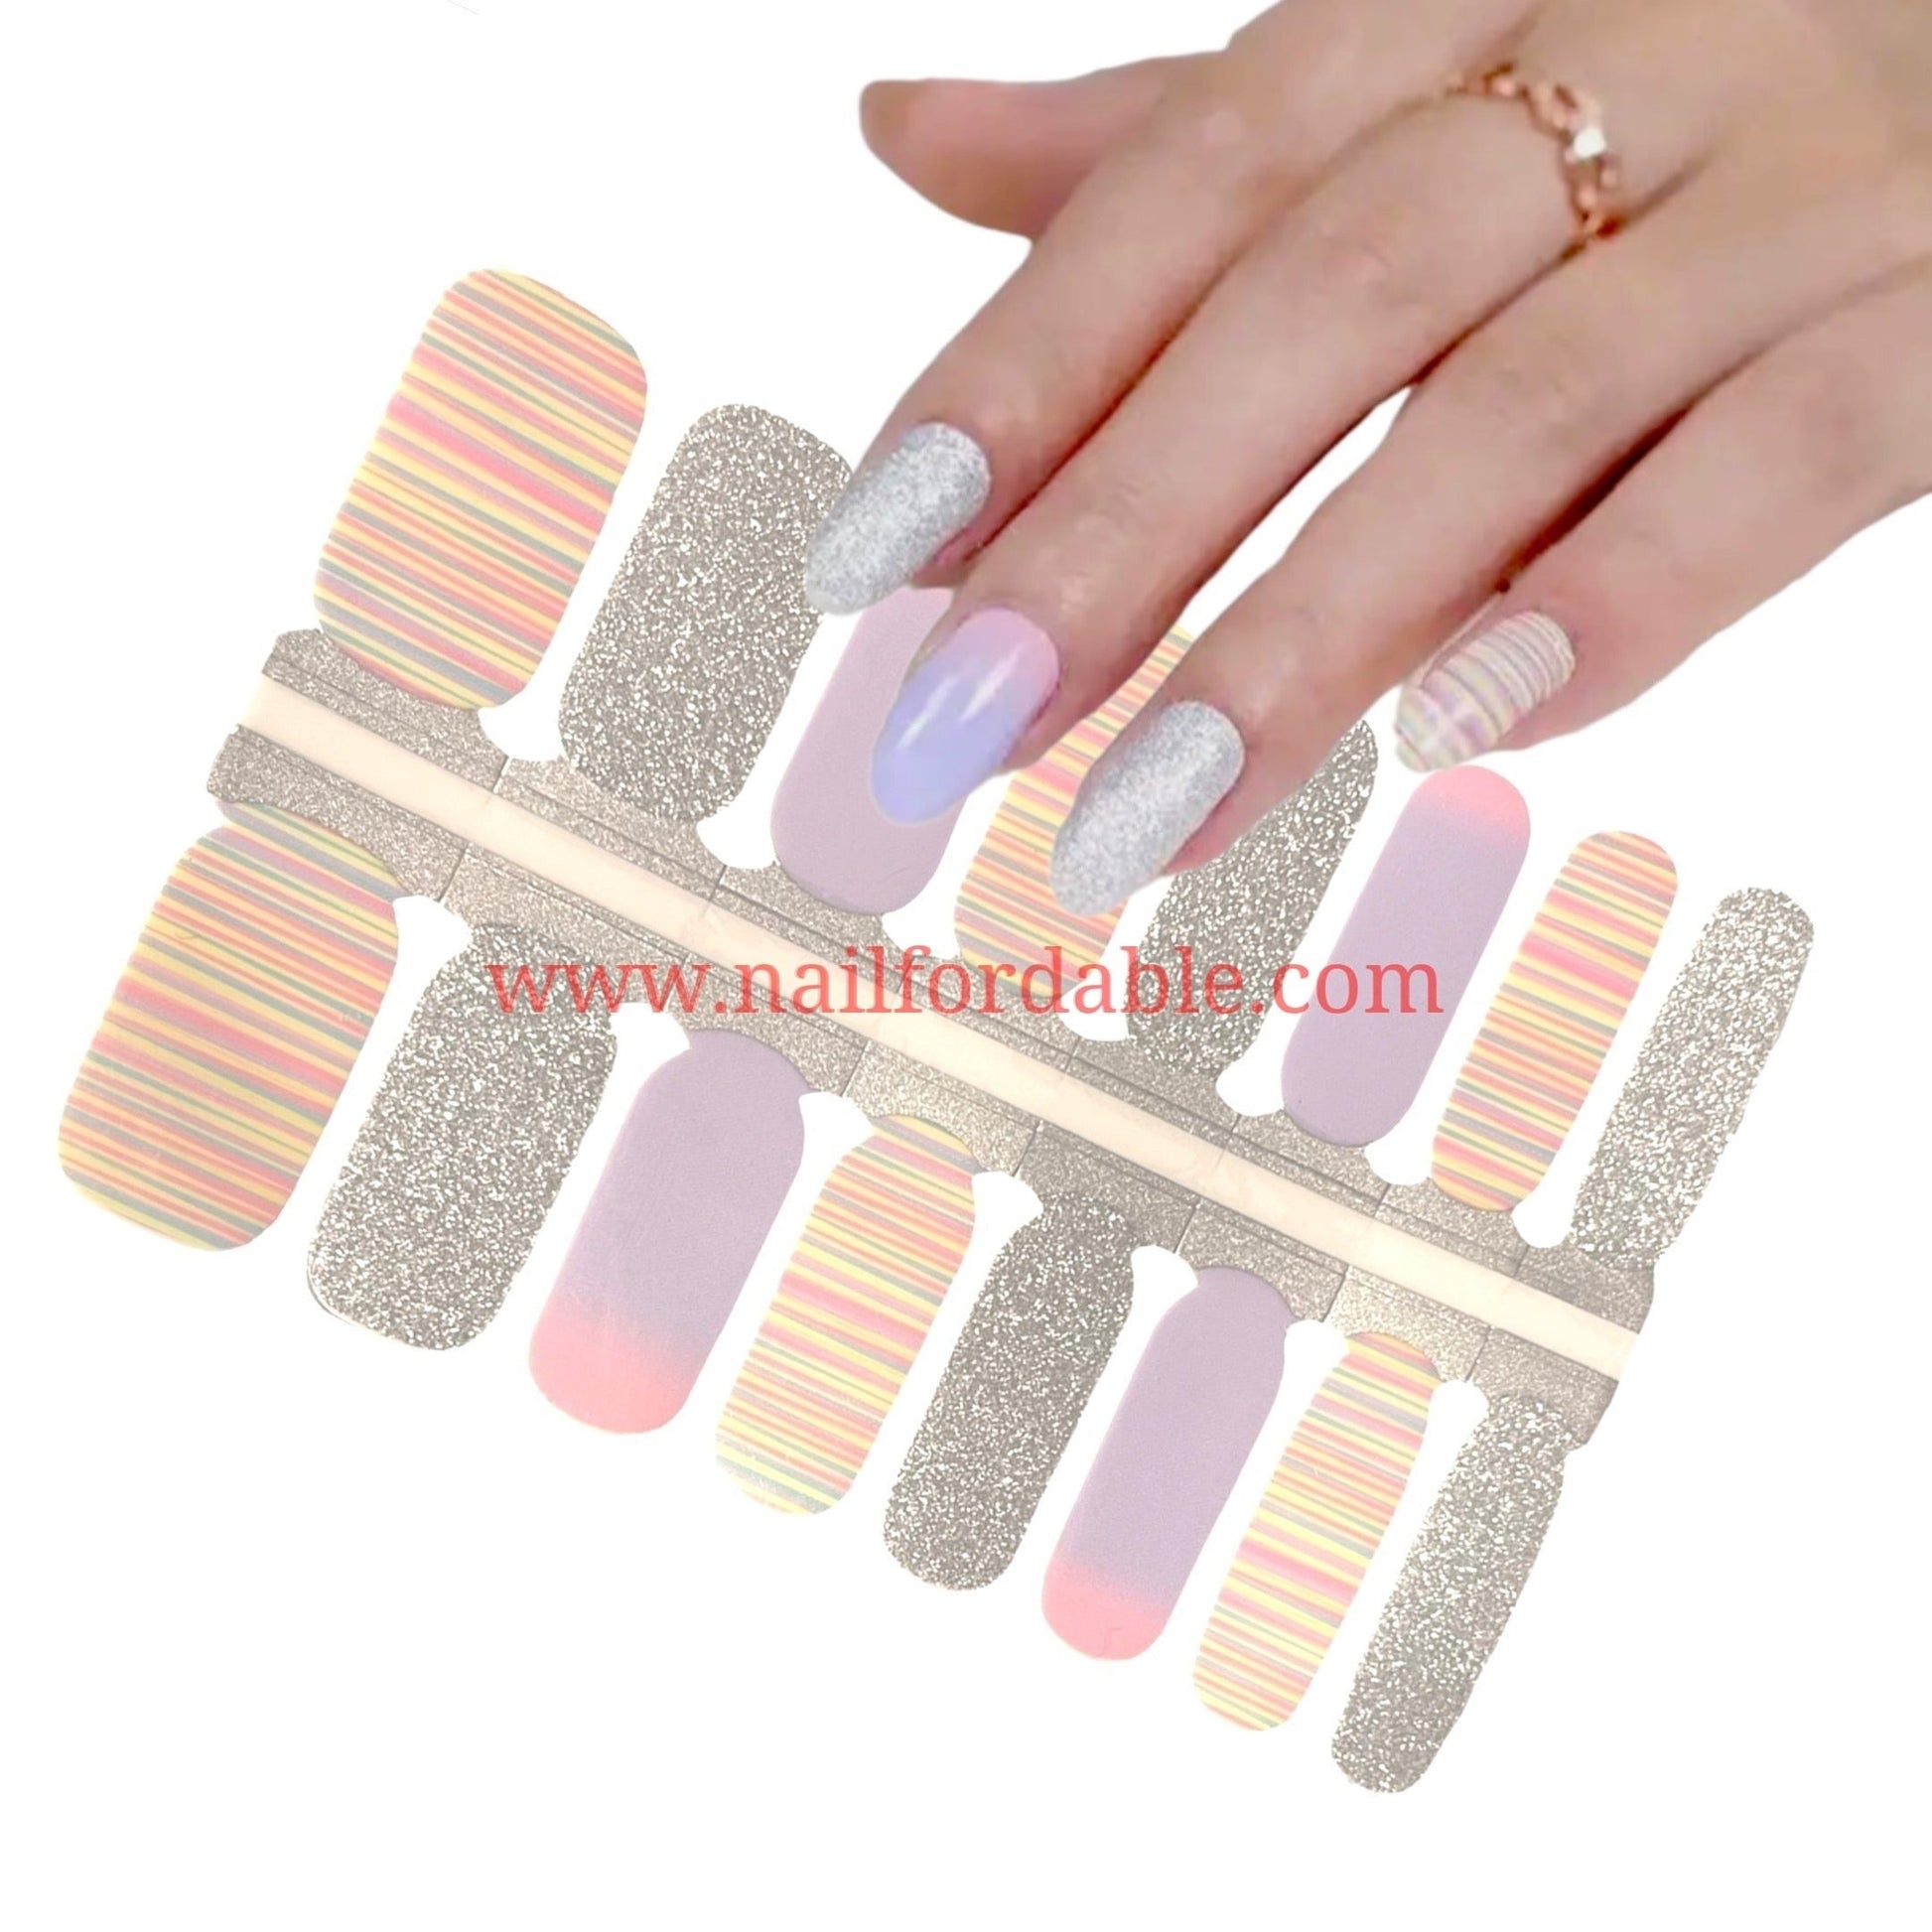 Party of colors Nail Wraps | Semi Cured Gel Wraps | Gel Nail Wraps |Nail Polish | Nail Stickers